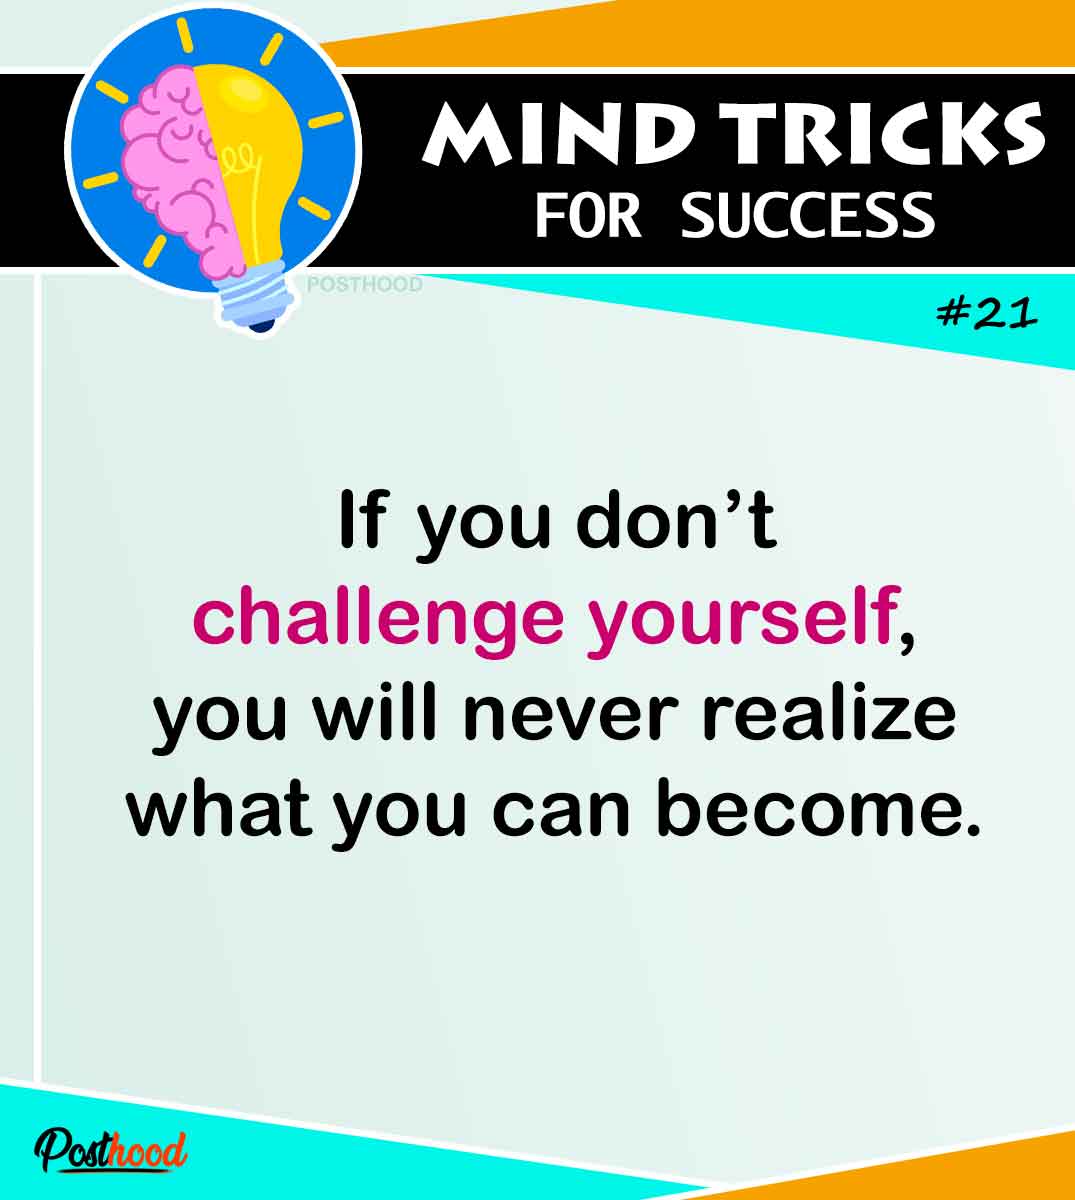 Want to change the old version of you that is serving you no longer? Challenge yourself to get a new skill set and habits to becomes someone amazing. Mind tricks for success.